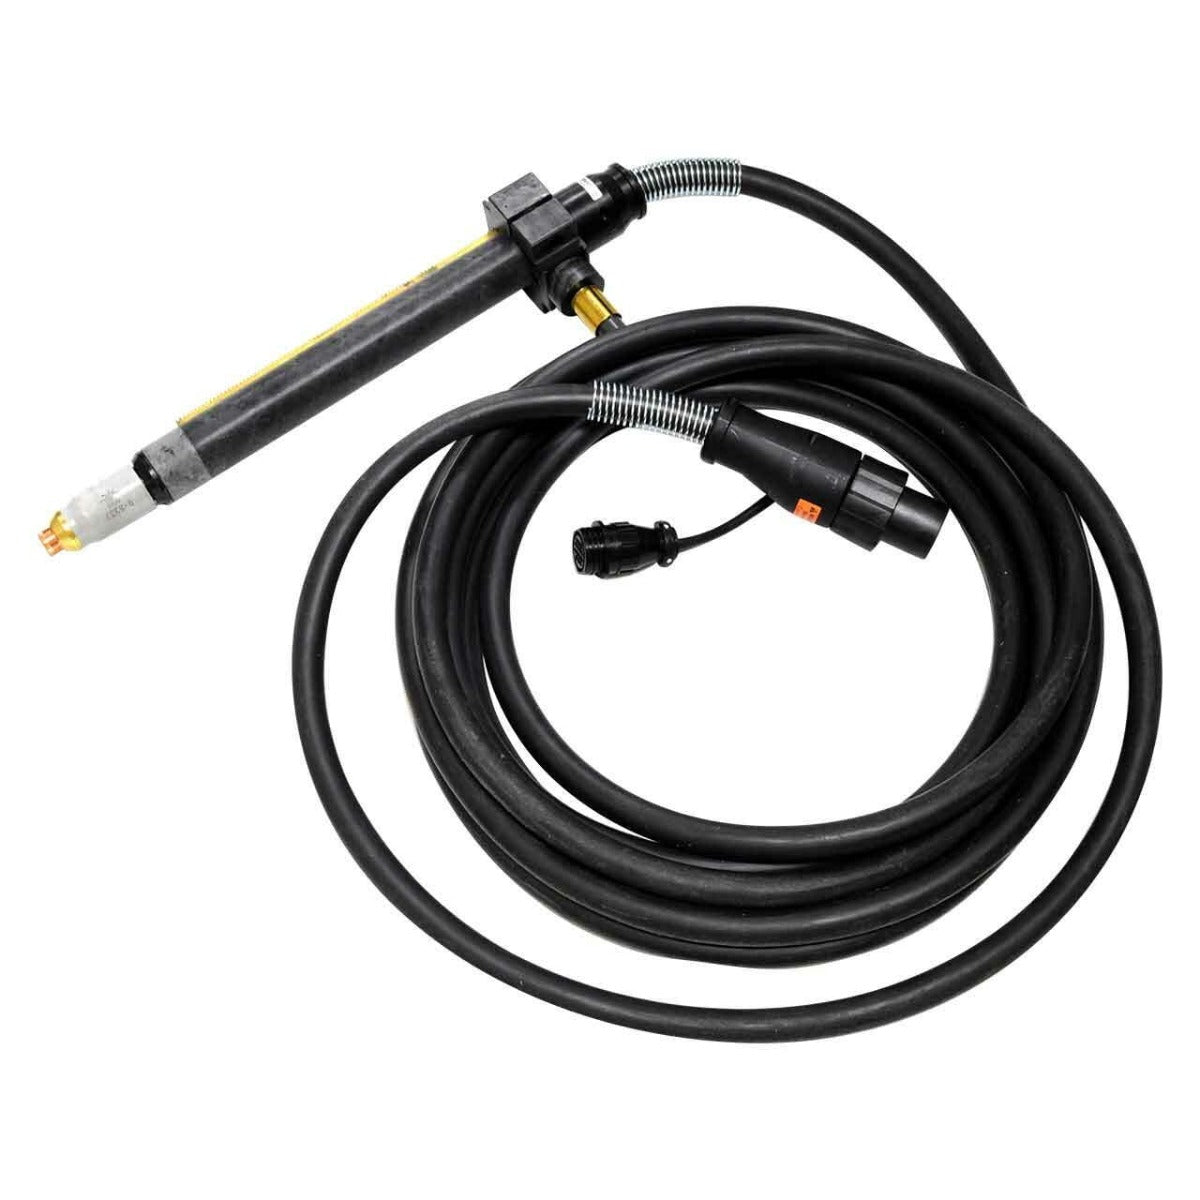 Thermal Dynamics SL100, 50 Ft Plasma Torch With Lead, 180 Degree Head (7-5216)